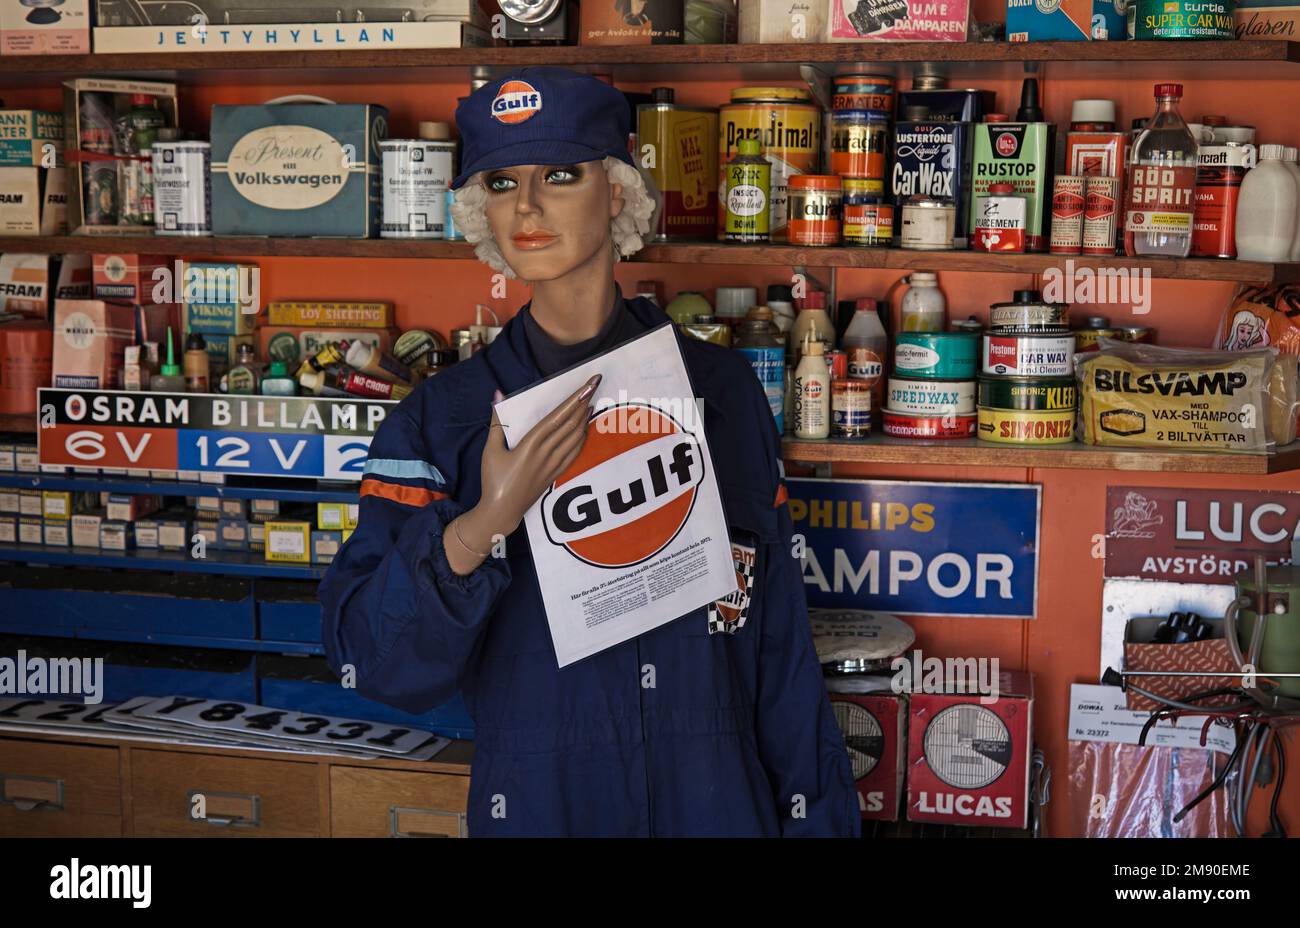 Vannas, Norrland Sweden - August 7, 2021: mannequin at old museum gas station Stock Photo